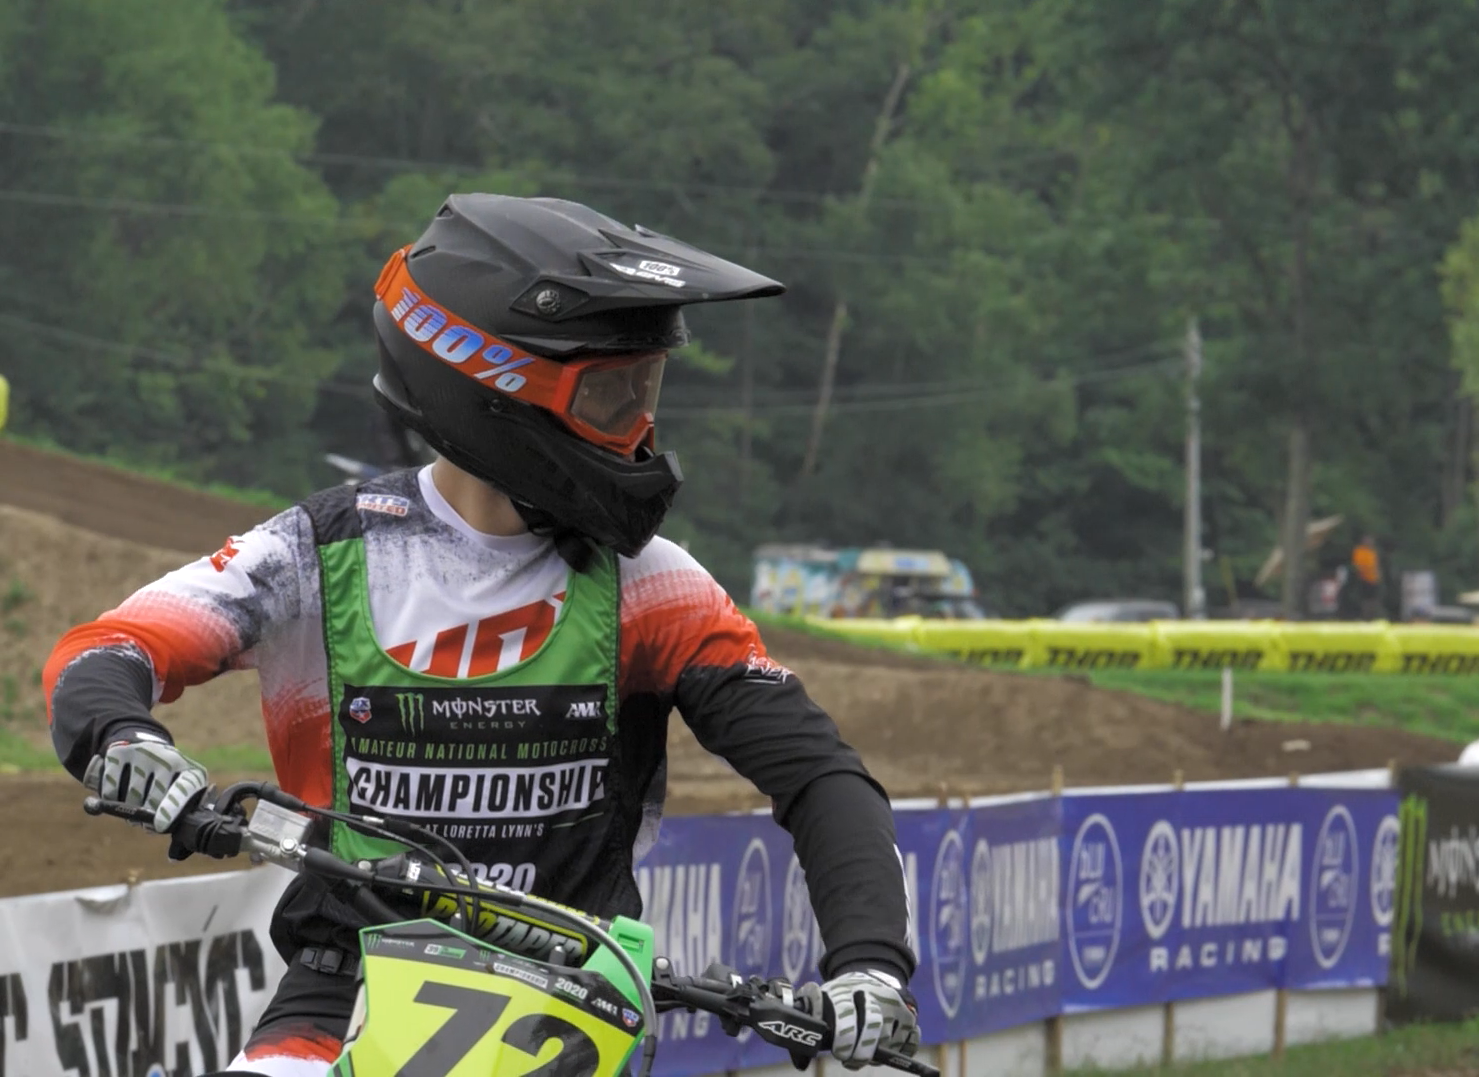 Our week at Loretta Lynn’s Amateur National Championships